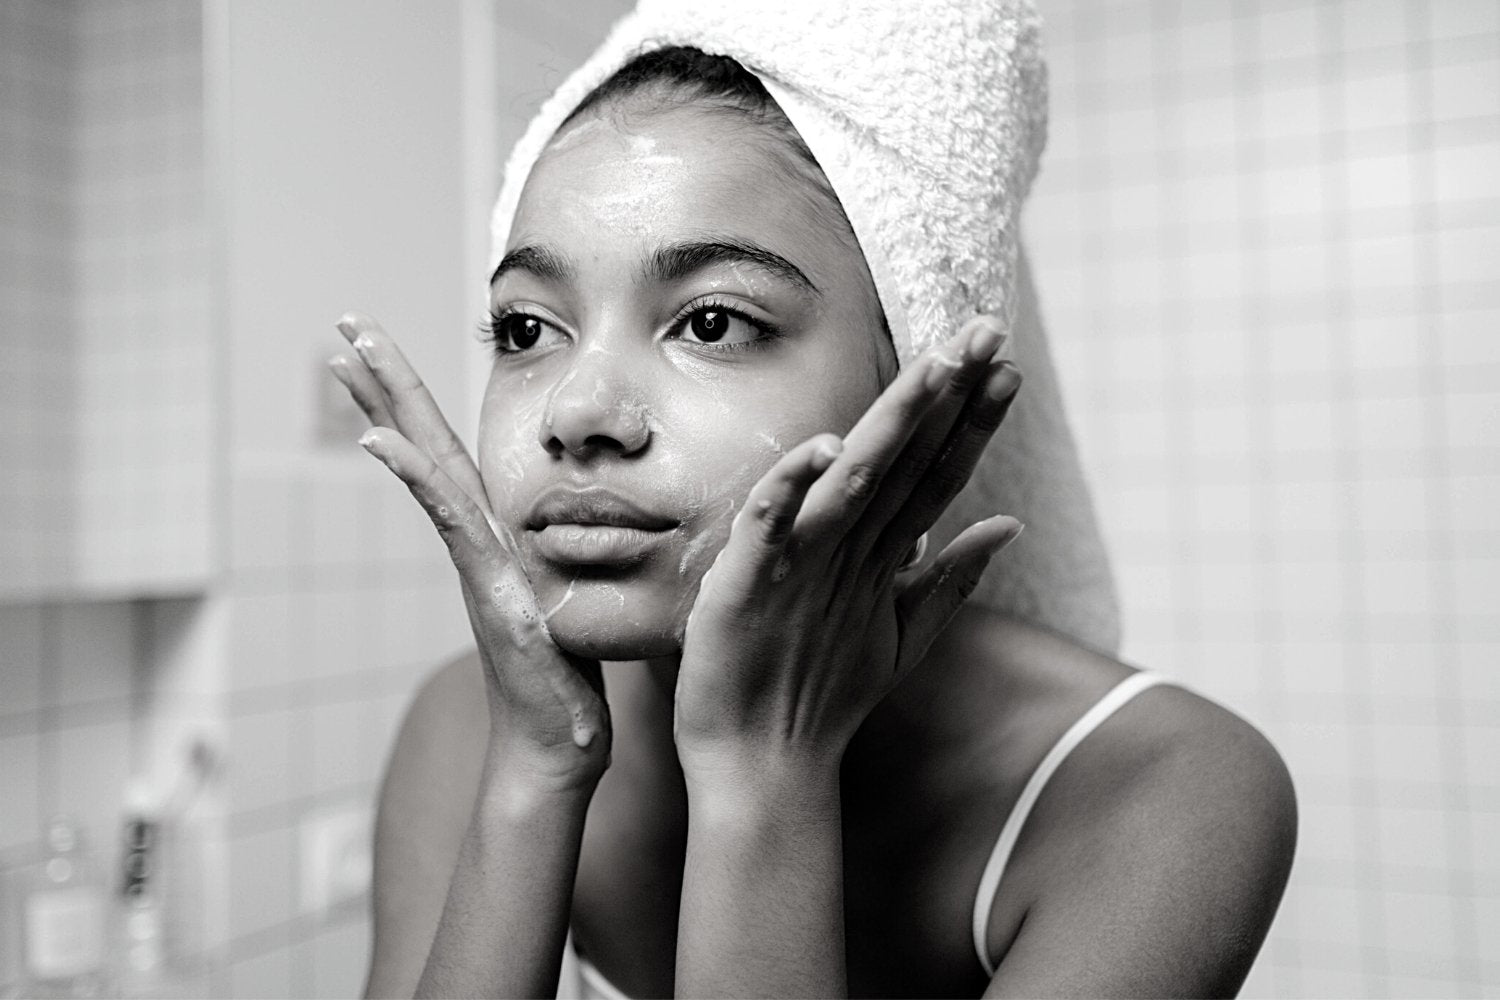 What is ethical skincare?